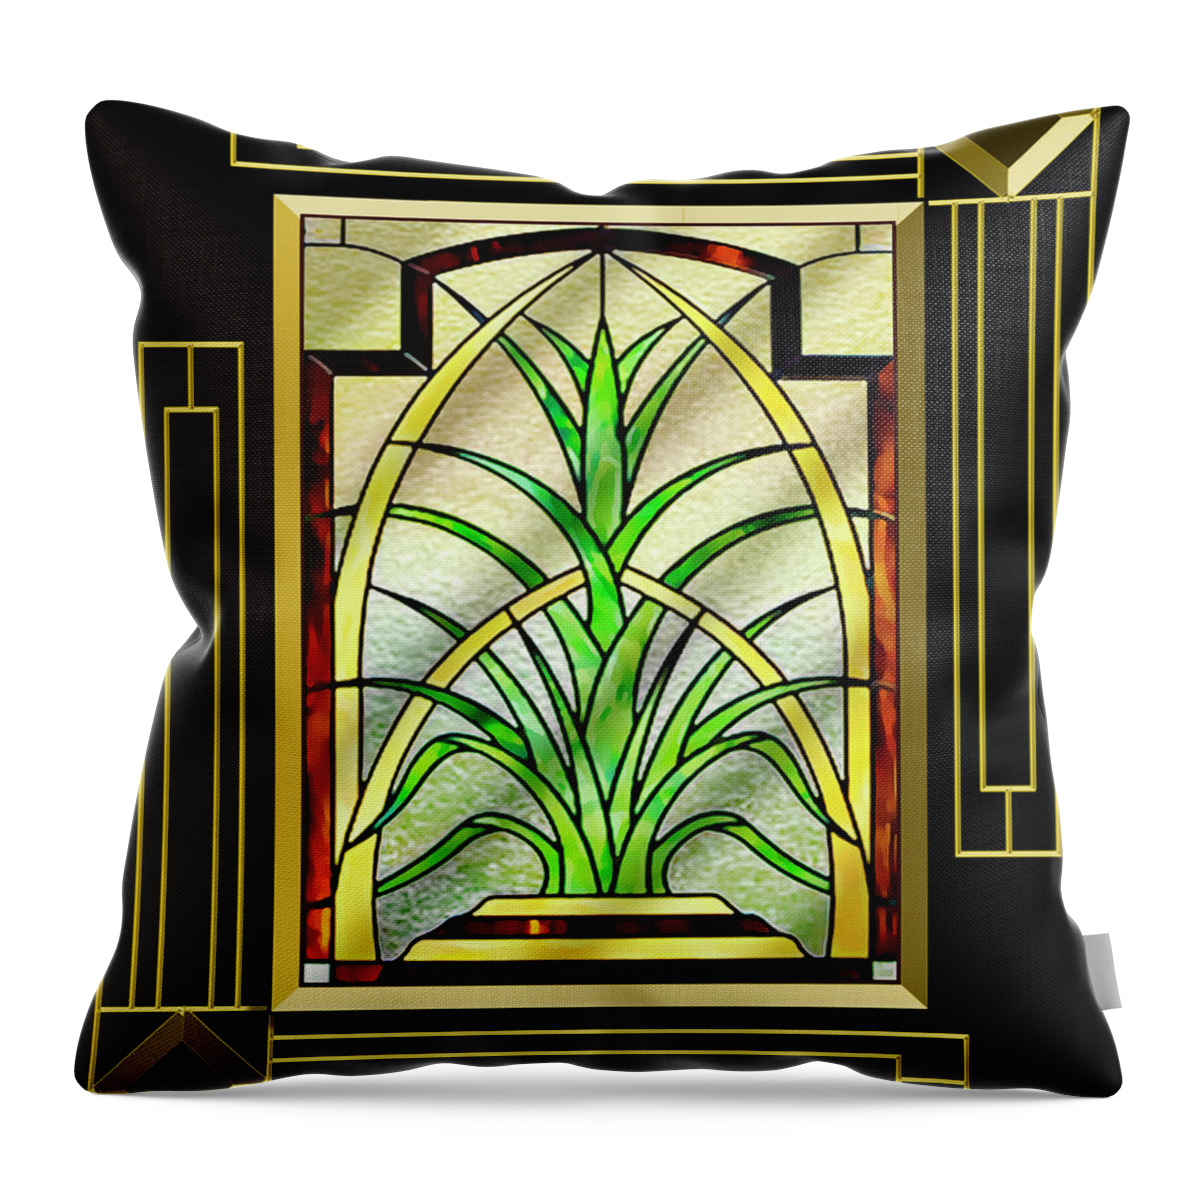 Stained Glass Throw Pillow featuring the digital art Stained Glass 1 - Frame 5 by Chuck Staley